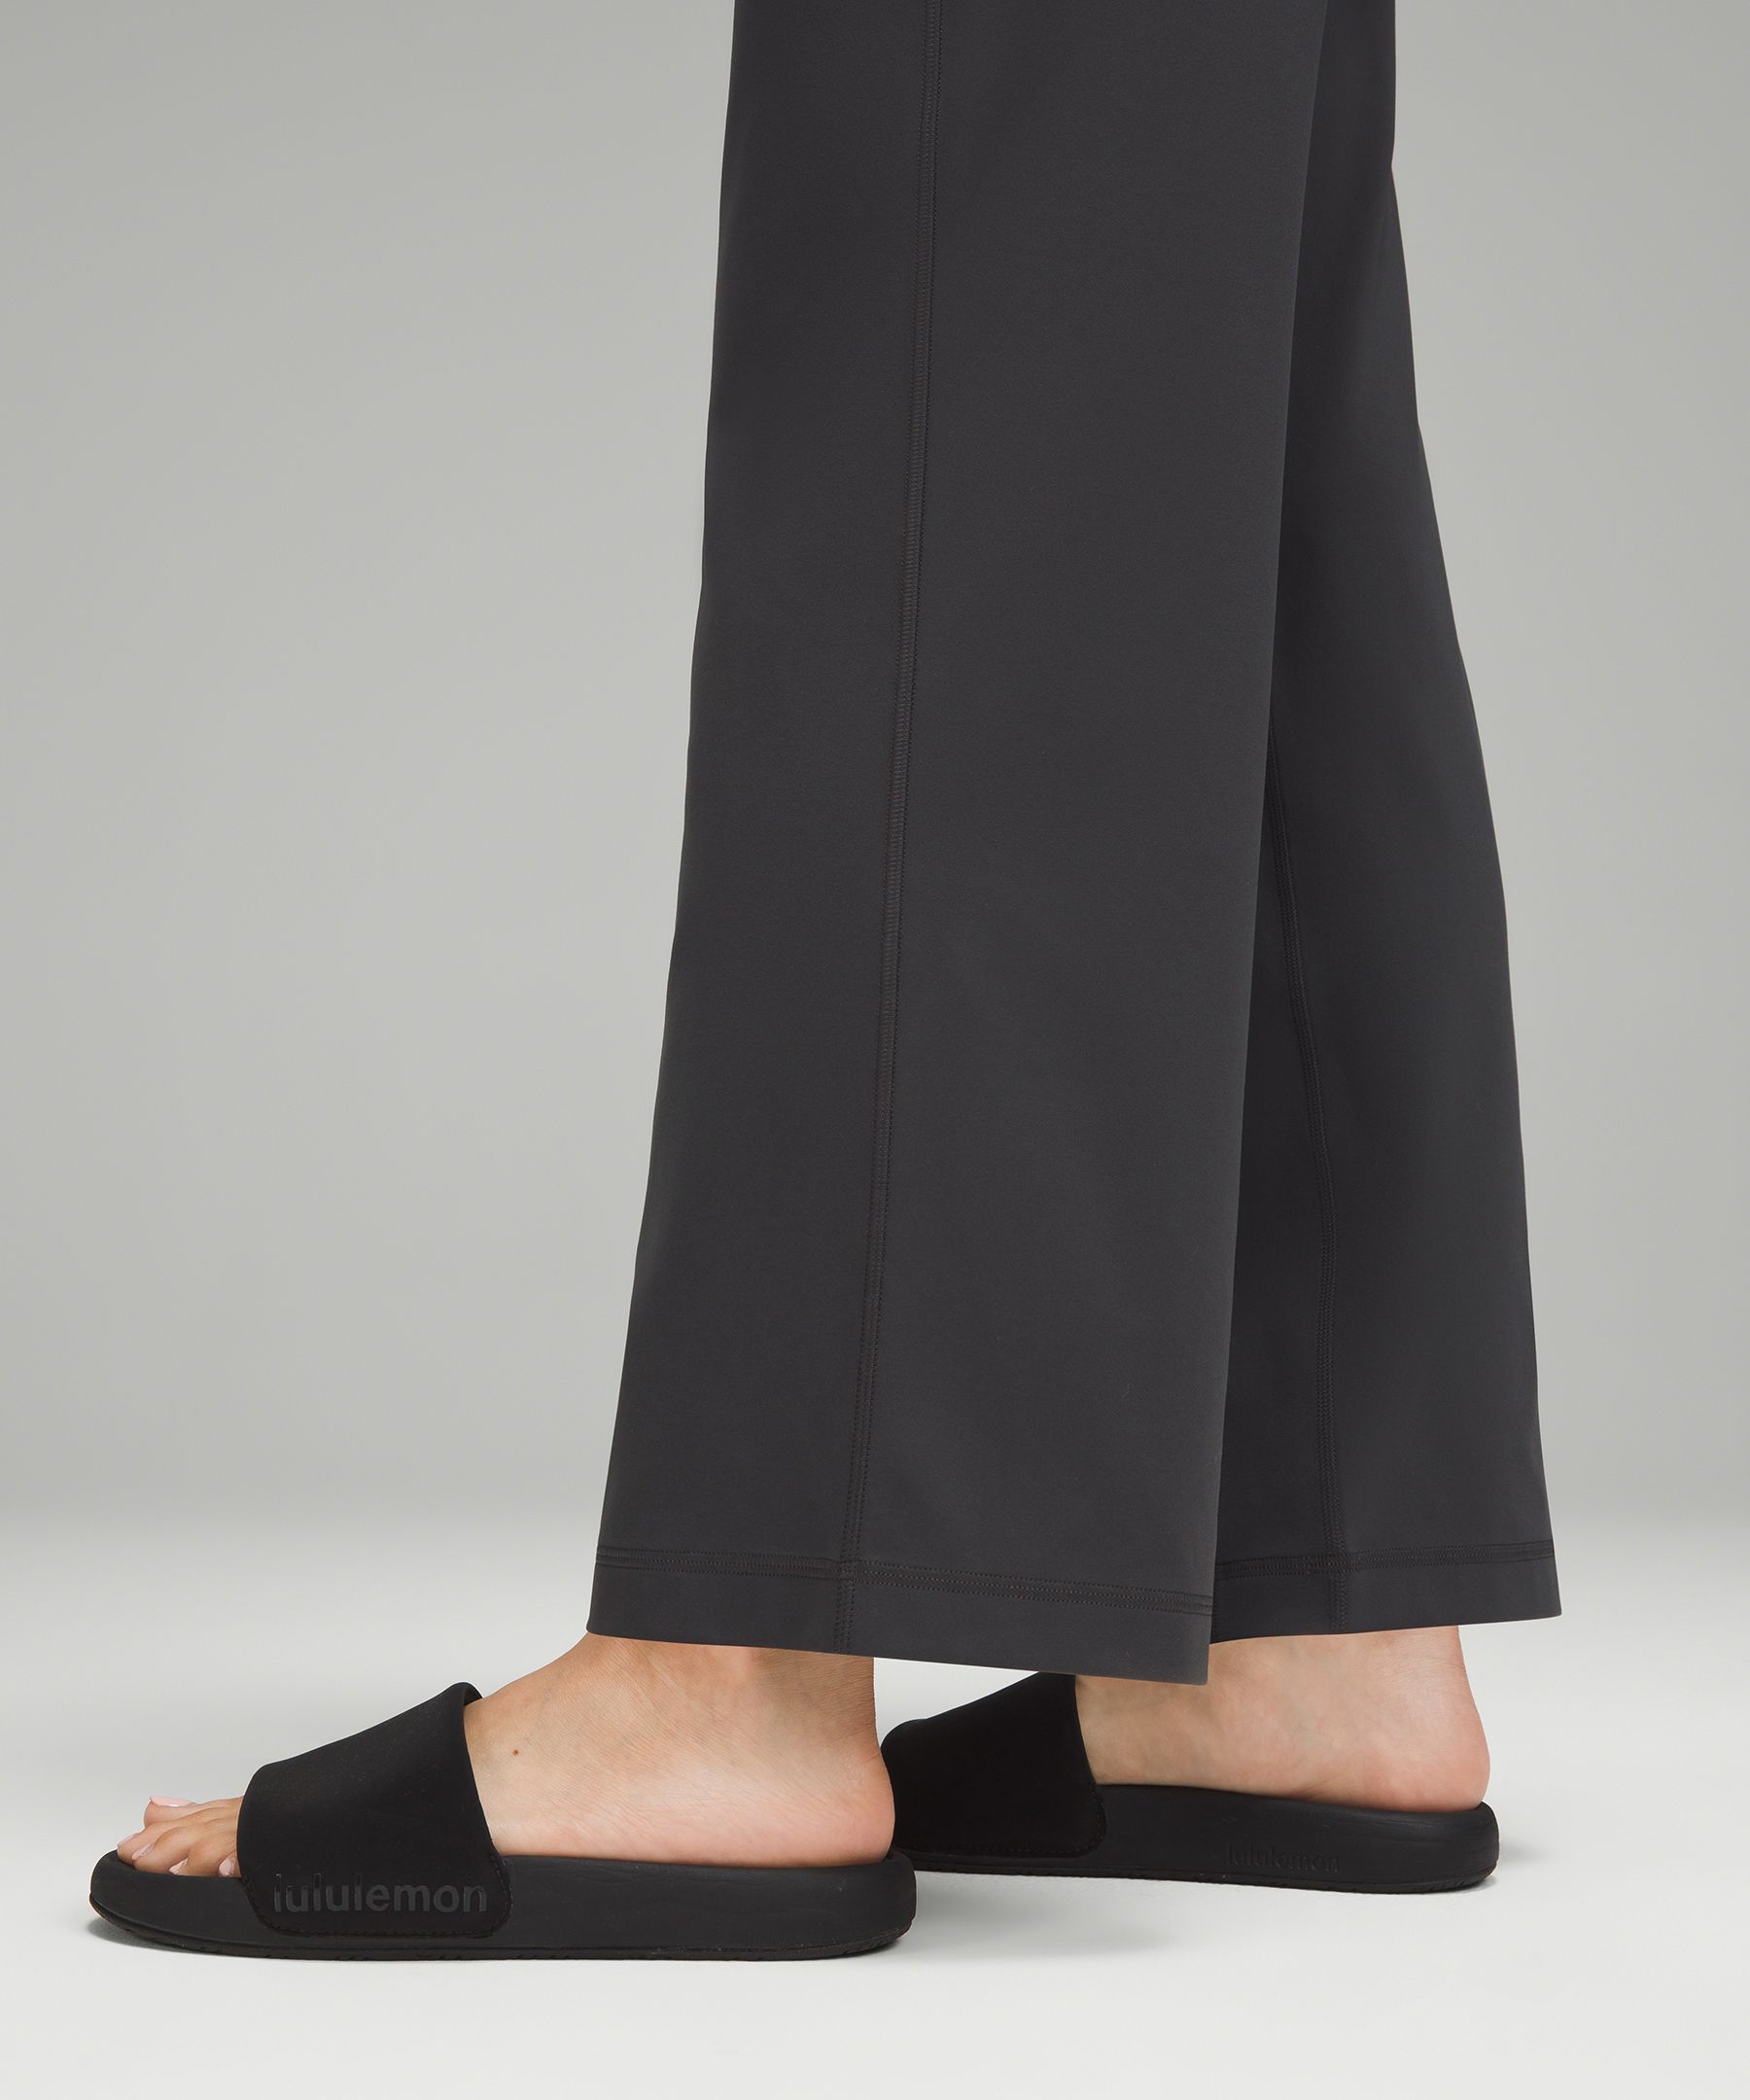 lululemon Align™ High-Rise Wide-Leg Pant 28 *Asia Fit, Carob Brown